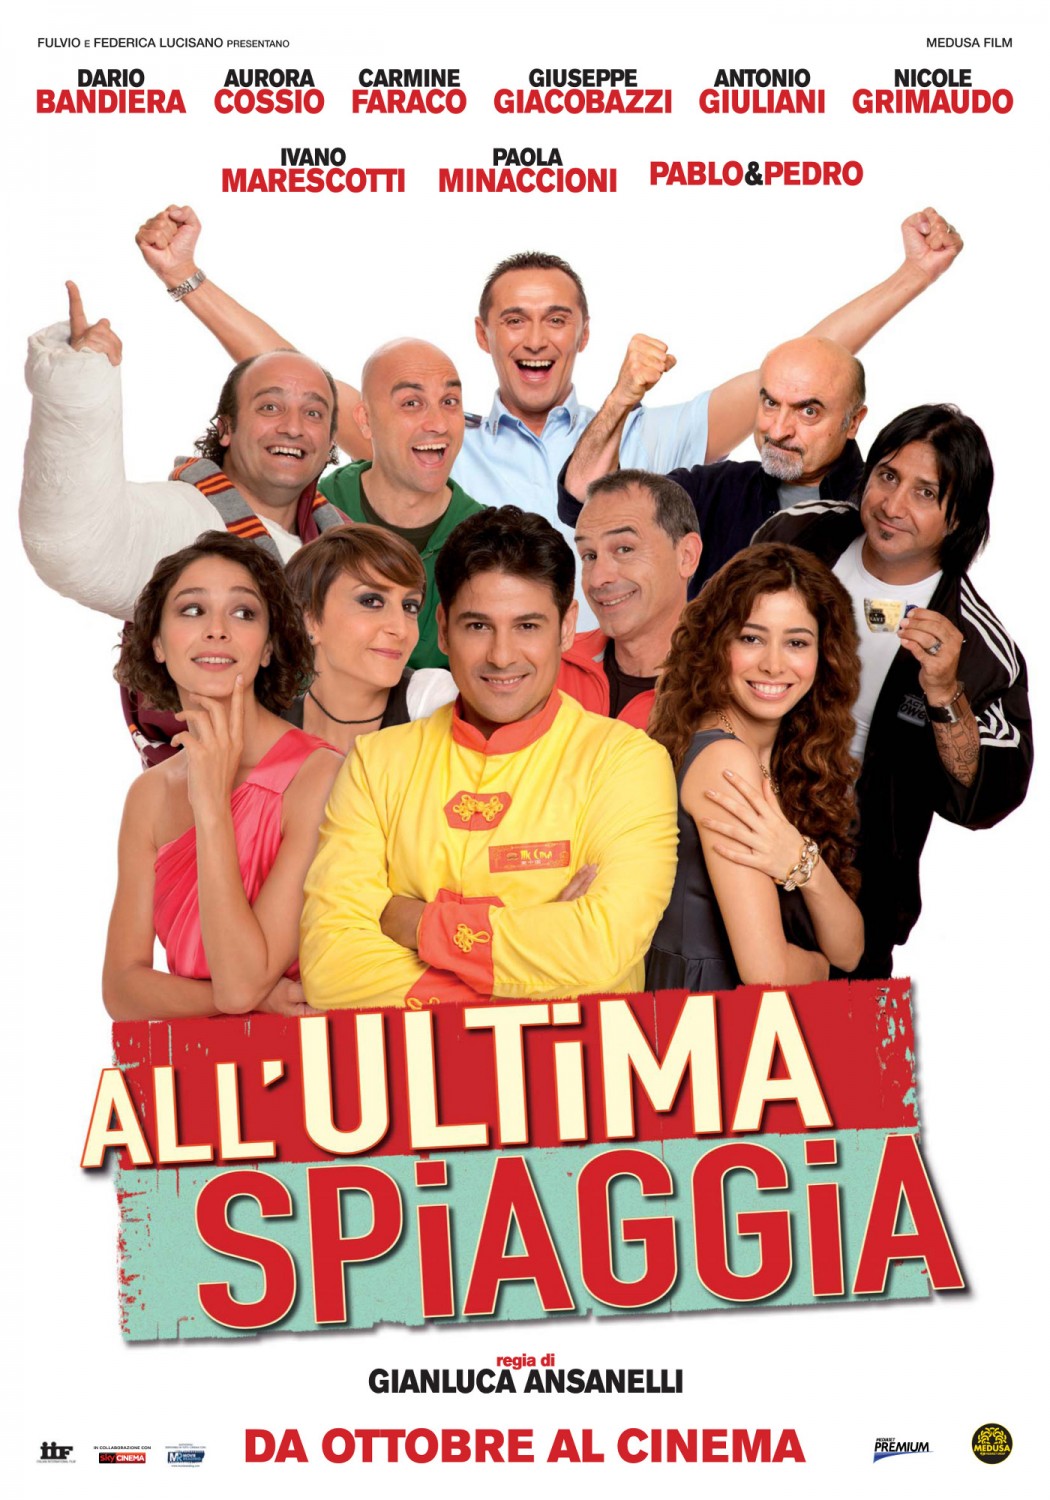 Extra Large Movie Poster Image for All'ultima spiaggia 